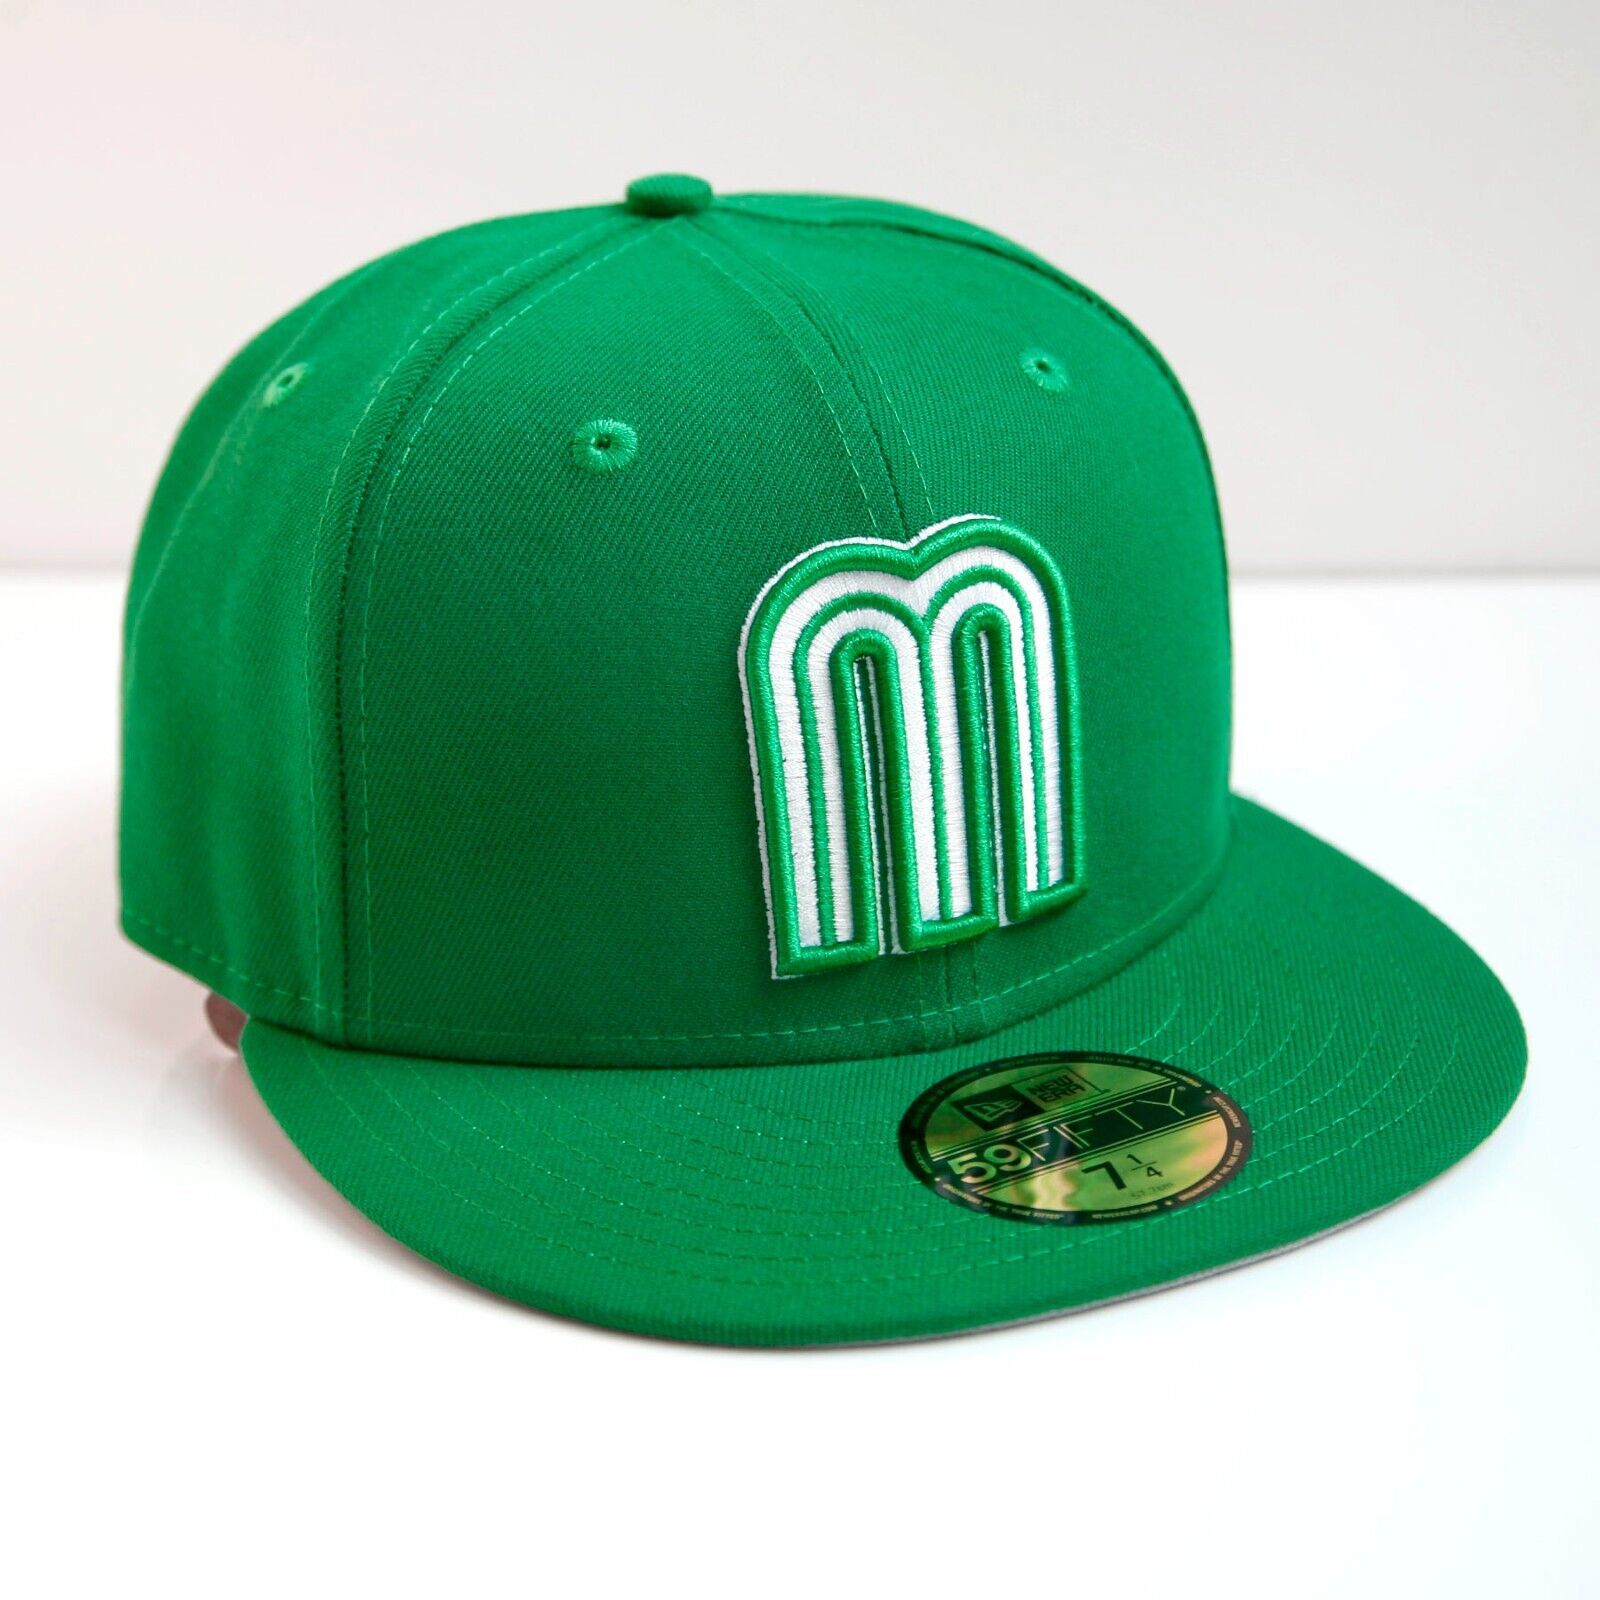 New Era Mexico Fitted Hat 59Fifty WBC Limited-Edition Green Size 7 1/4 - $89.06